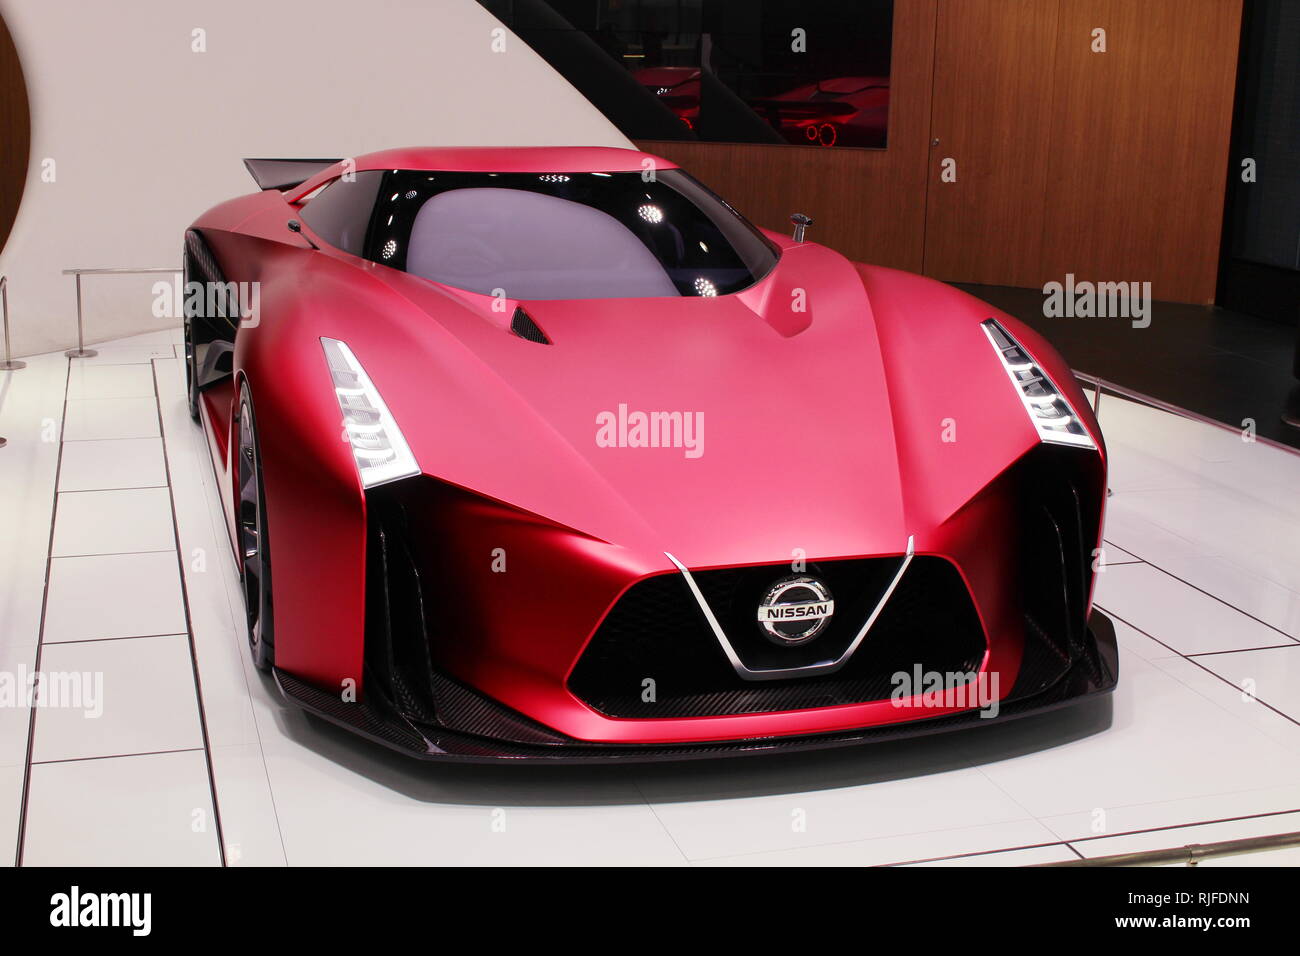 A Nissan Concept Vision Gran Turismo At The Nissan Crossing Showroom In Ginza Place Stock Photo Alamy